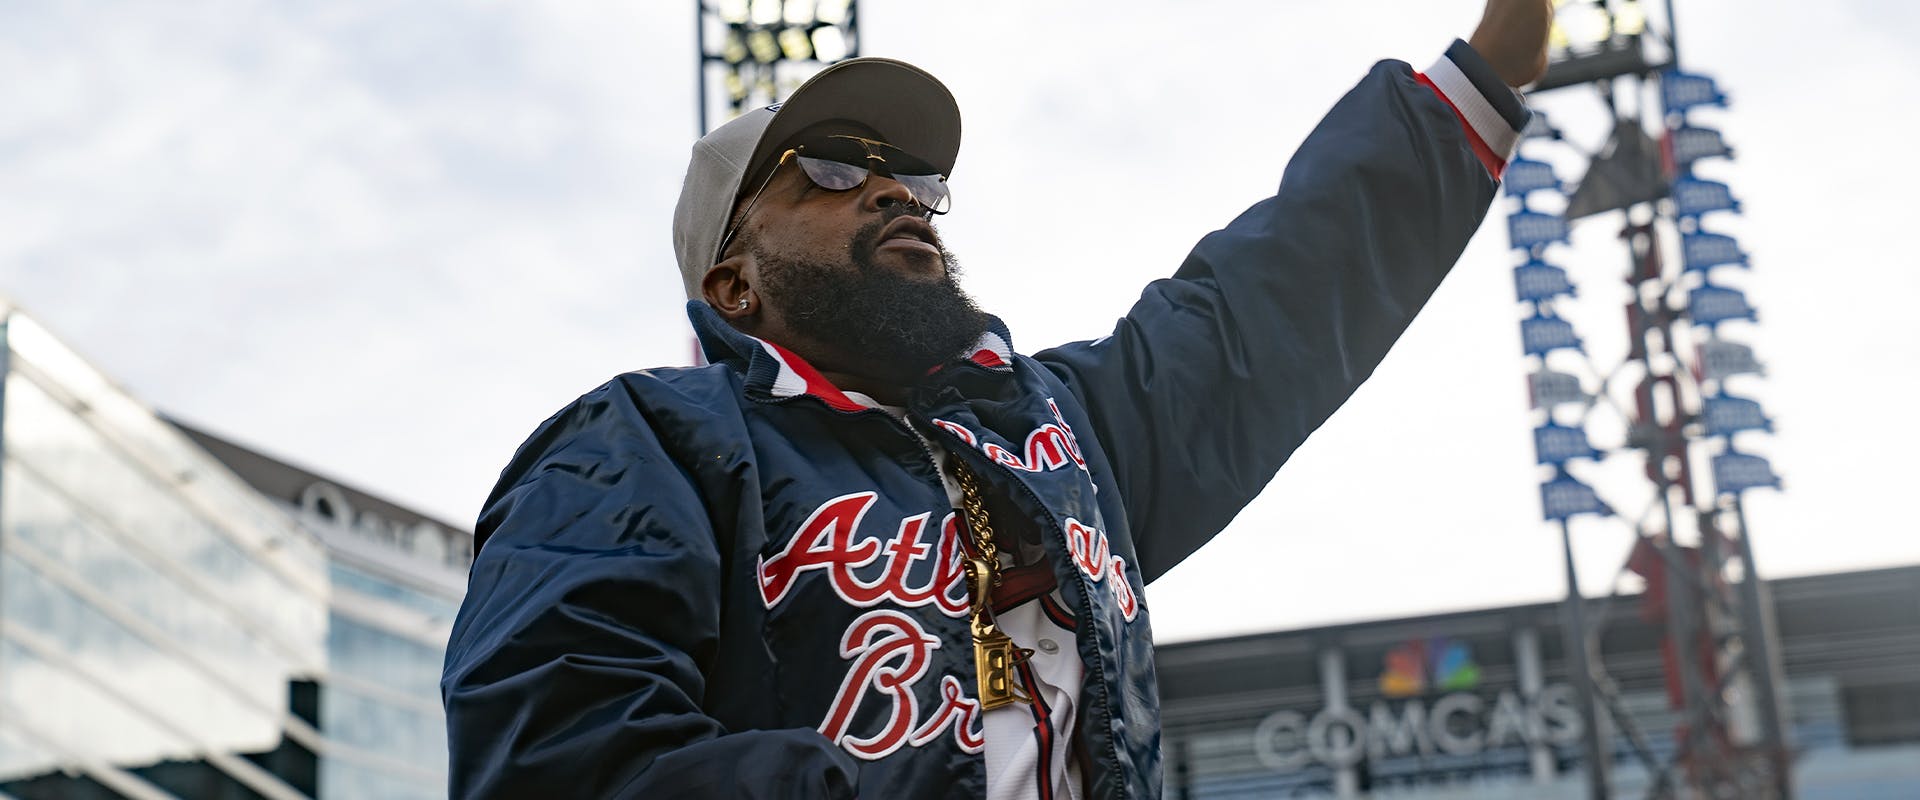 Rapper Big Boi performs following the World Series Parade at Truist Park on November 5, 2021 in Atlanta, Georgia. The Atlanta Braves won the World Series in six games against the Houston Astros winning their first championship since 1995. (Photo by Megan Varner/Getty Images)